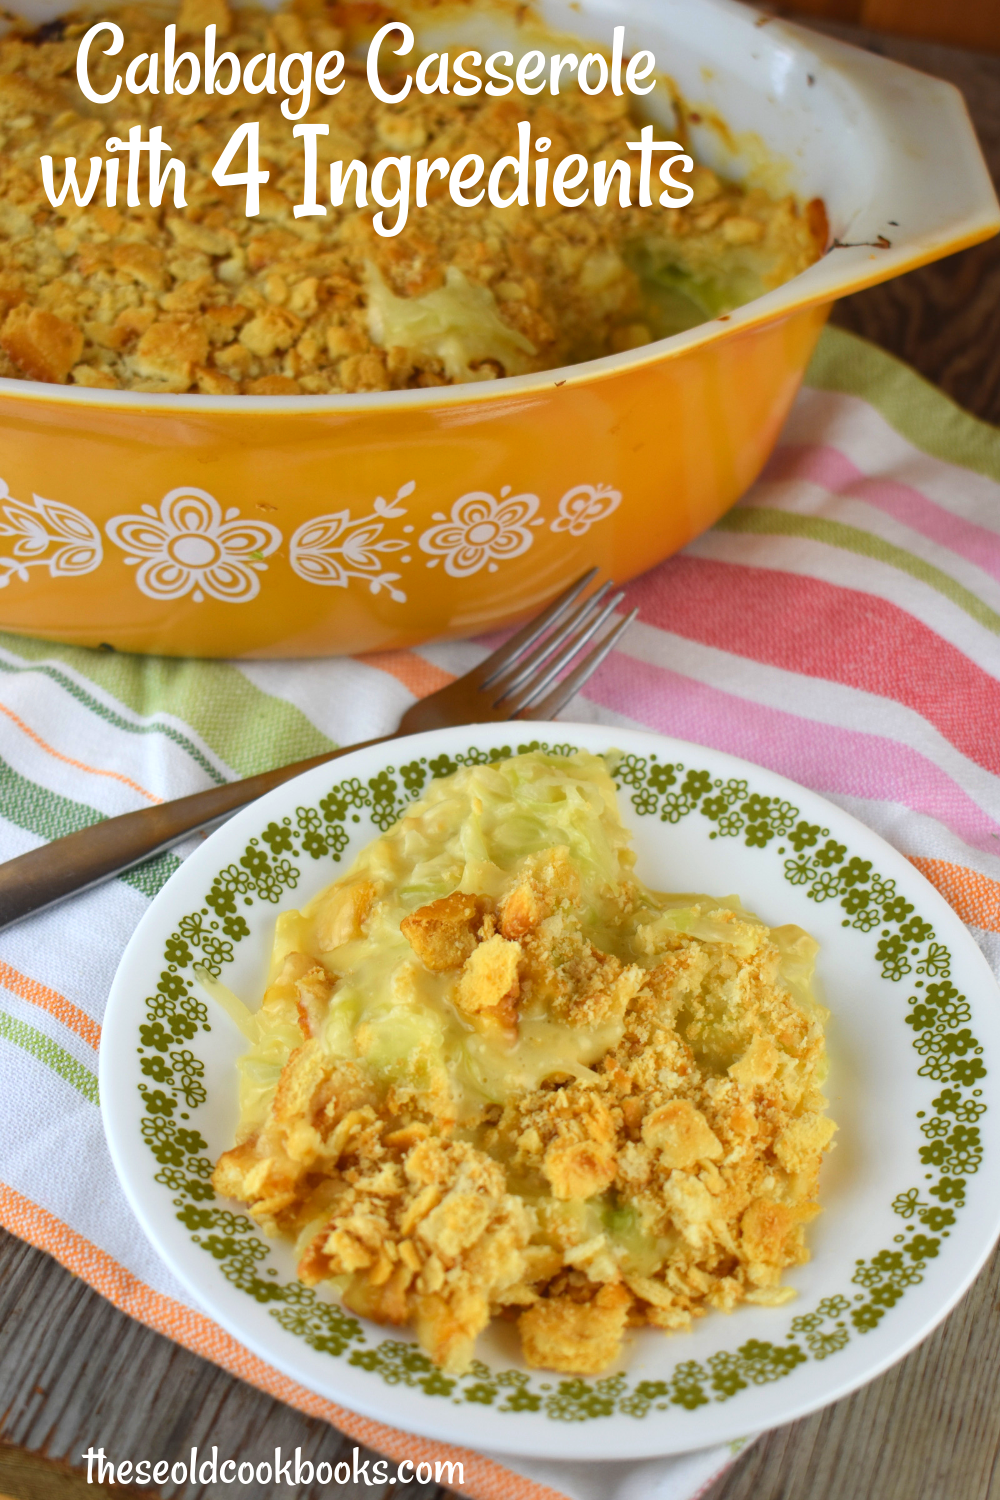 This 4 Ingredient Cabbage Casserole is simple to make featuring cabbage, cream of celery soup, Velveeta and butter crackers.  The creaminess of the casserole complements the buttery crunchy of the topping for a crowd-pleasing side dish that can be served any time of year.